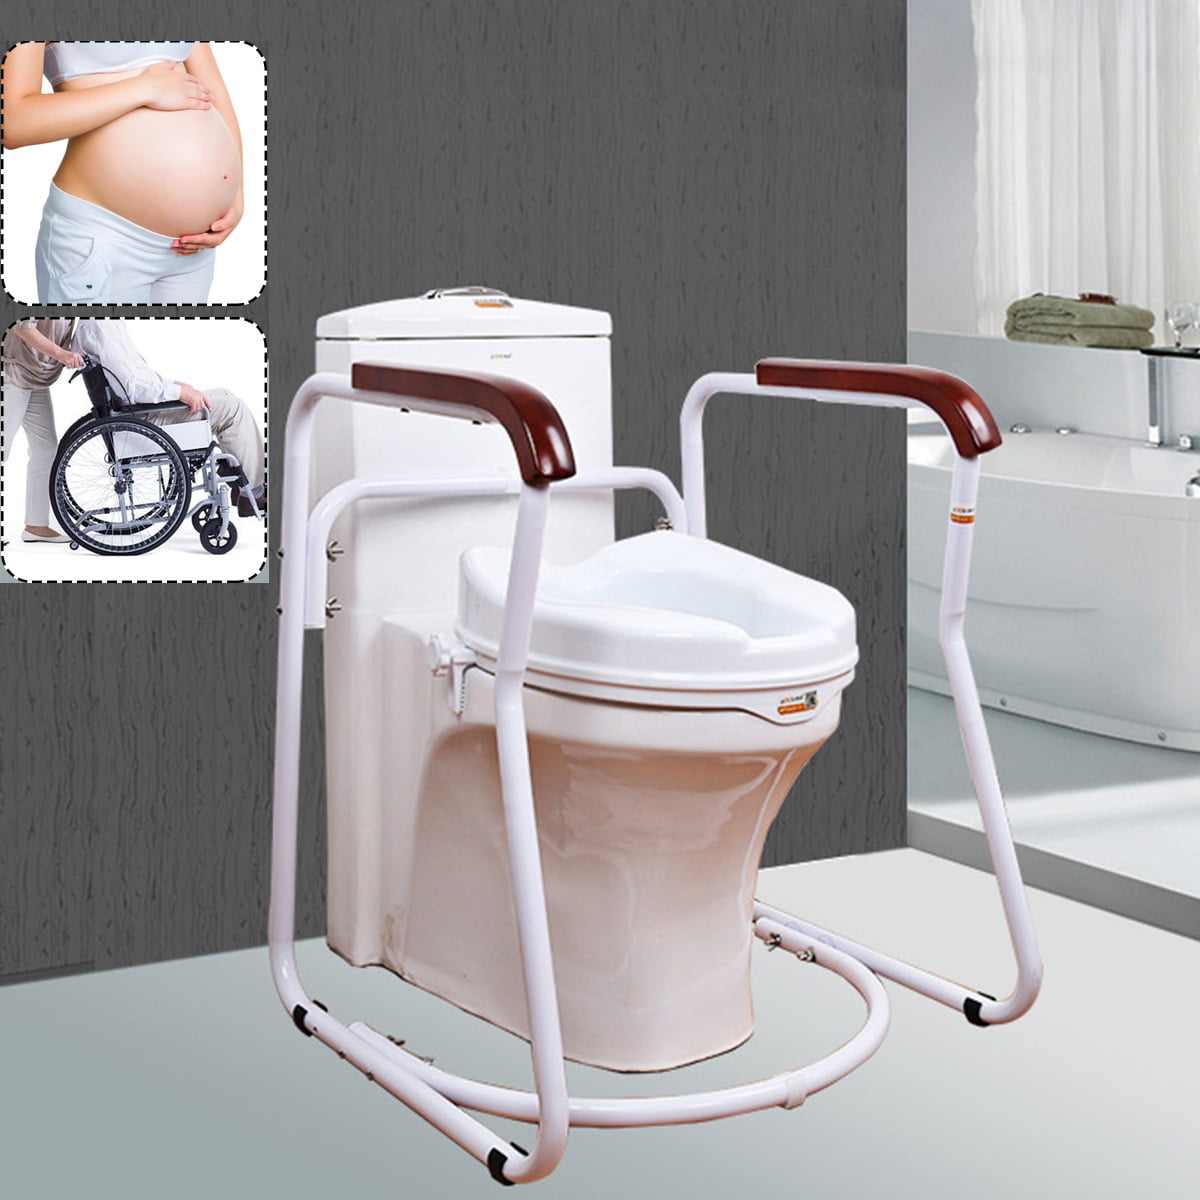 Stand Alone Toilet Rail Bathroom Safety Assist Frame